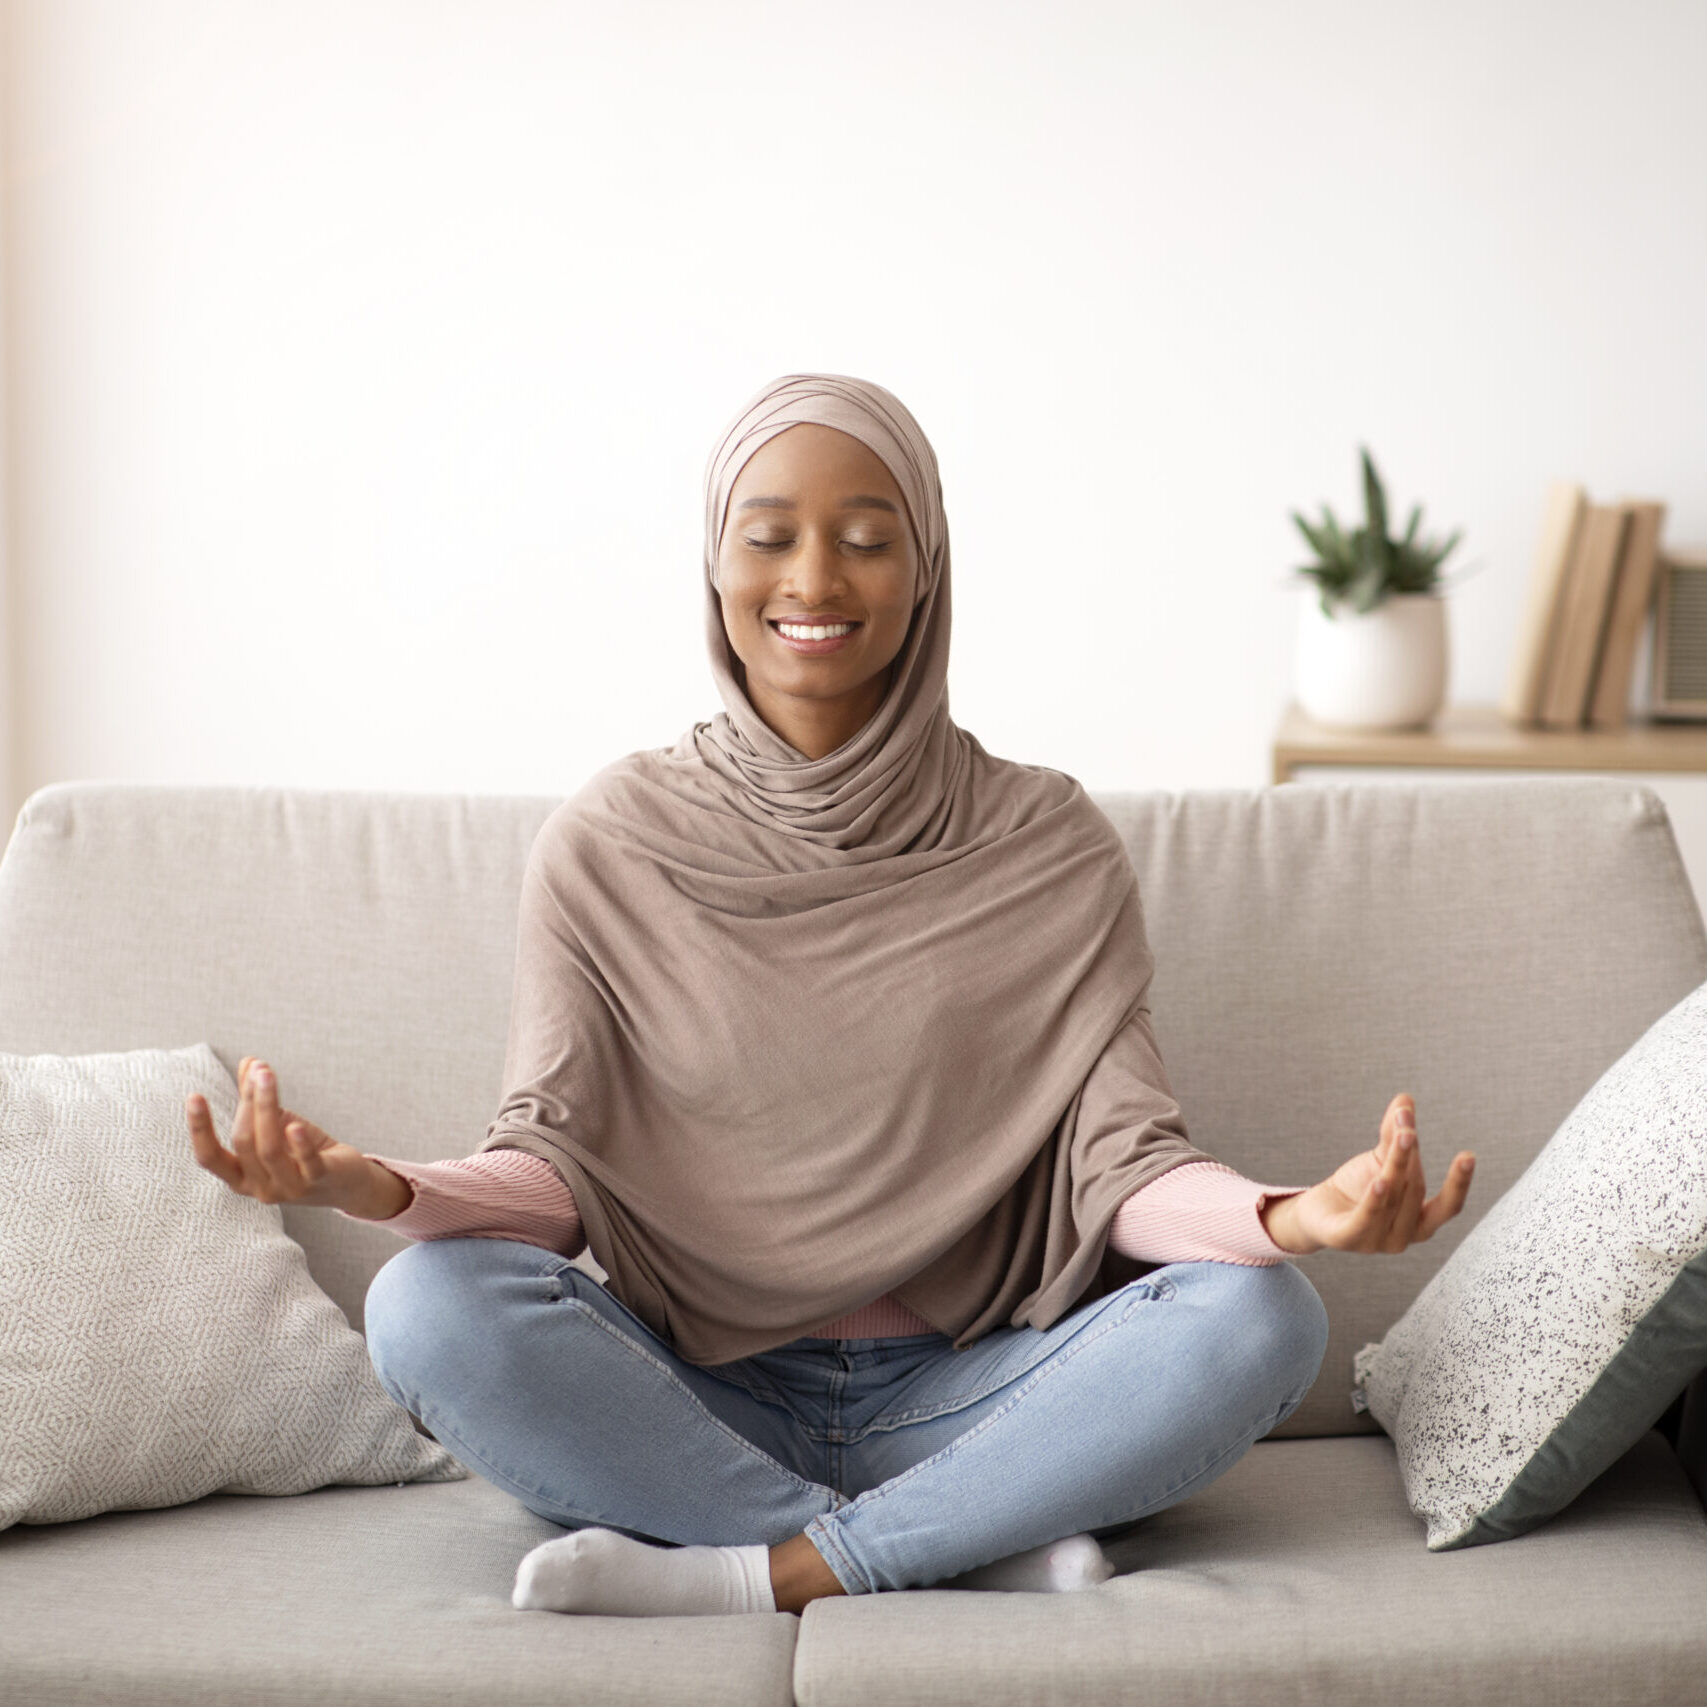 Stress management concept. Peaceful young lady in hijab meditating with closed eyes on sofa at home. Pretty Muslim woman sitting on couch in yoga pose, finding inner balance